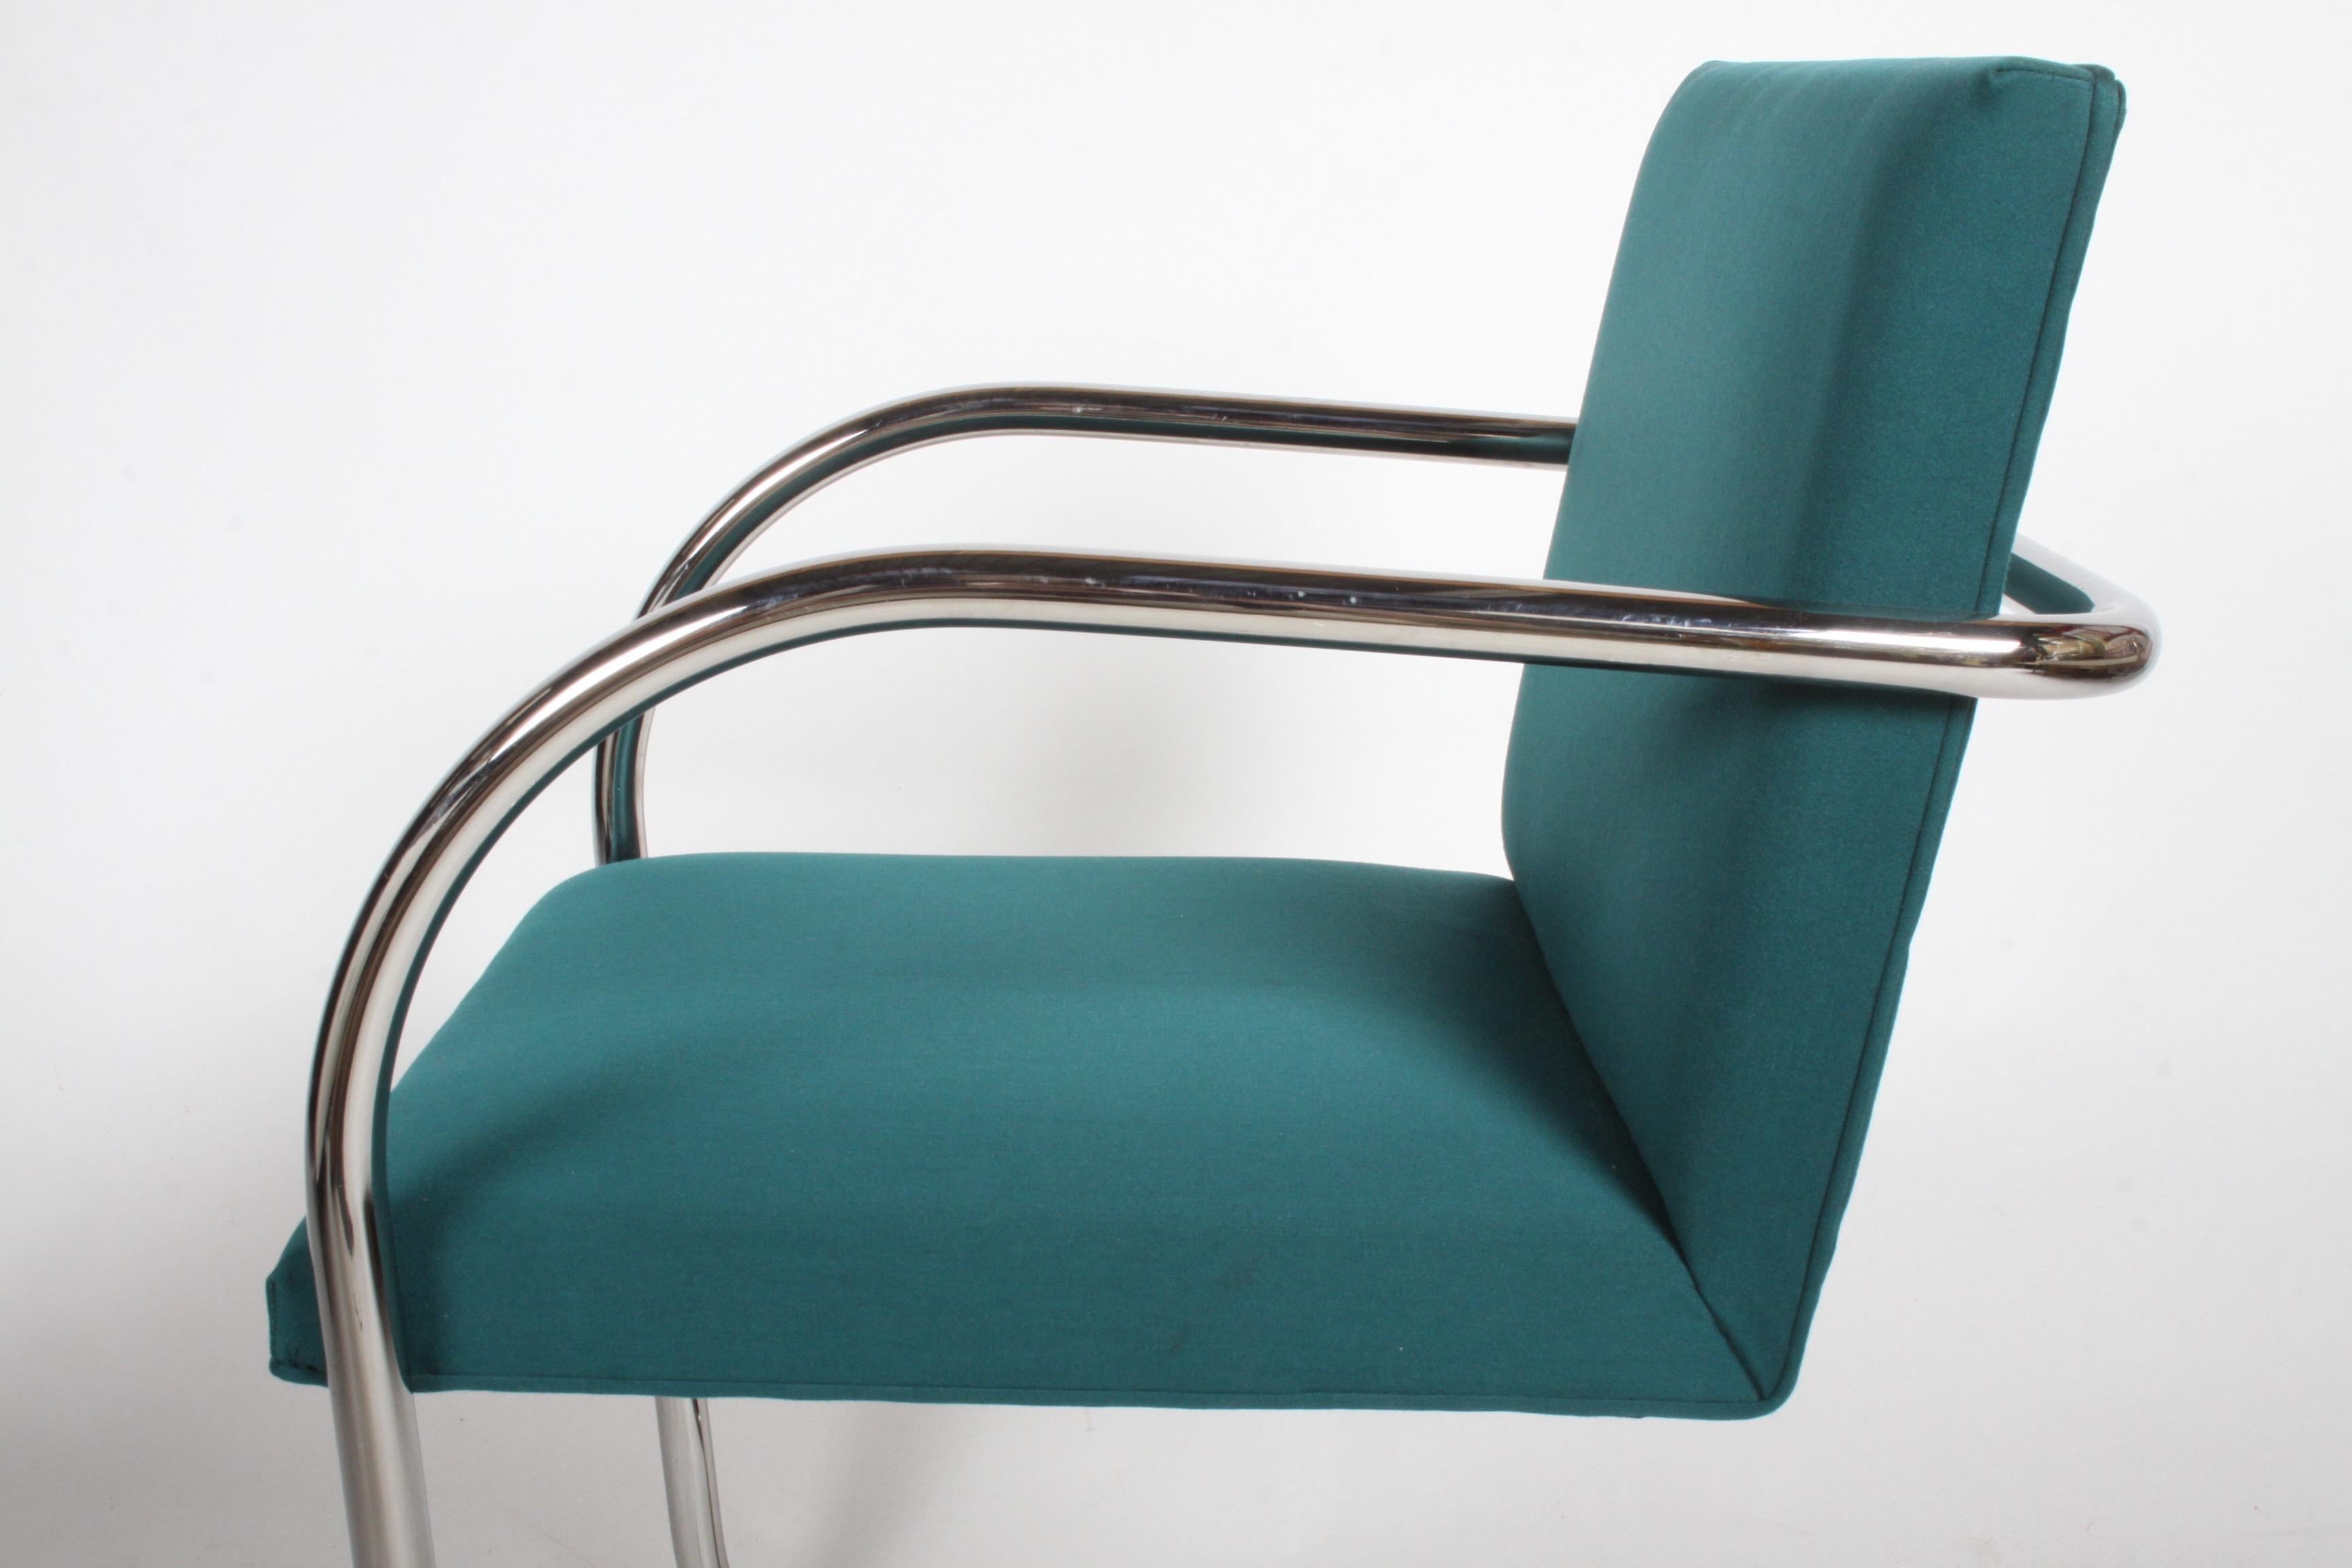 Plated Mid-Century Modern Ludwig Mies van der Rohe for Knoll Tubular Brno Chairs x 2 For Sale